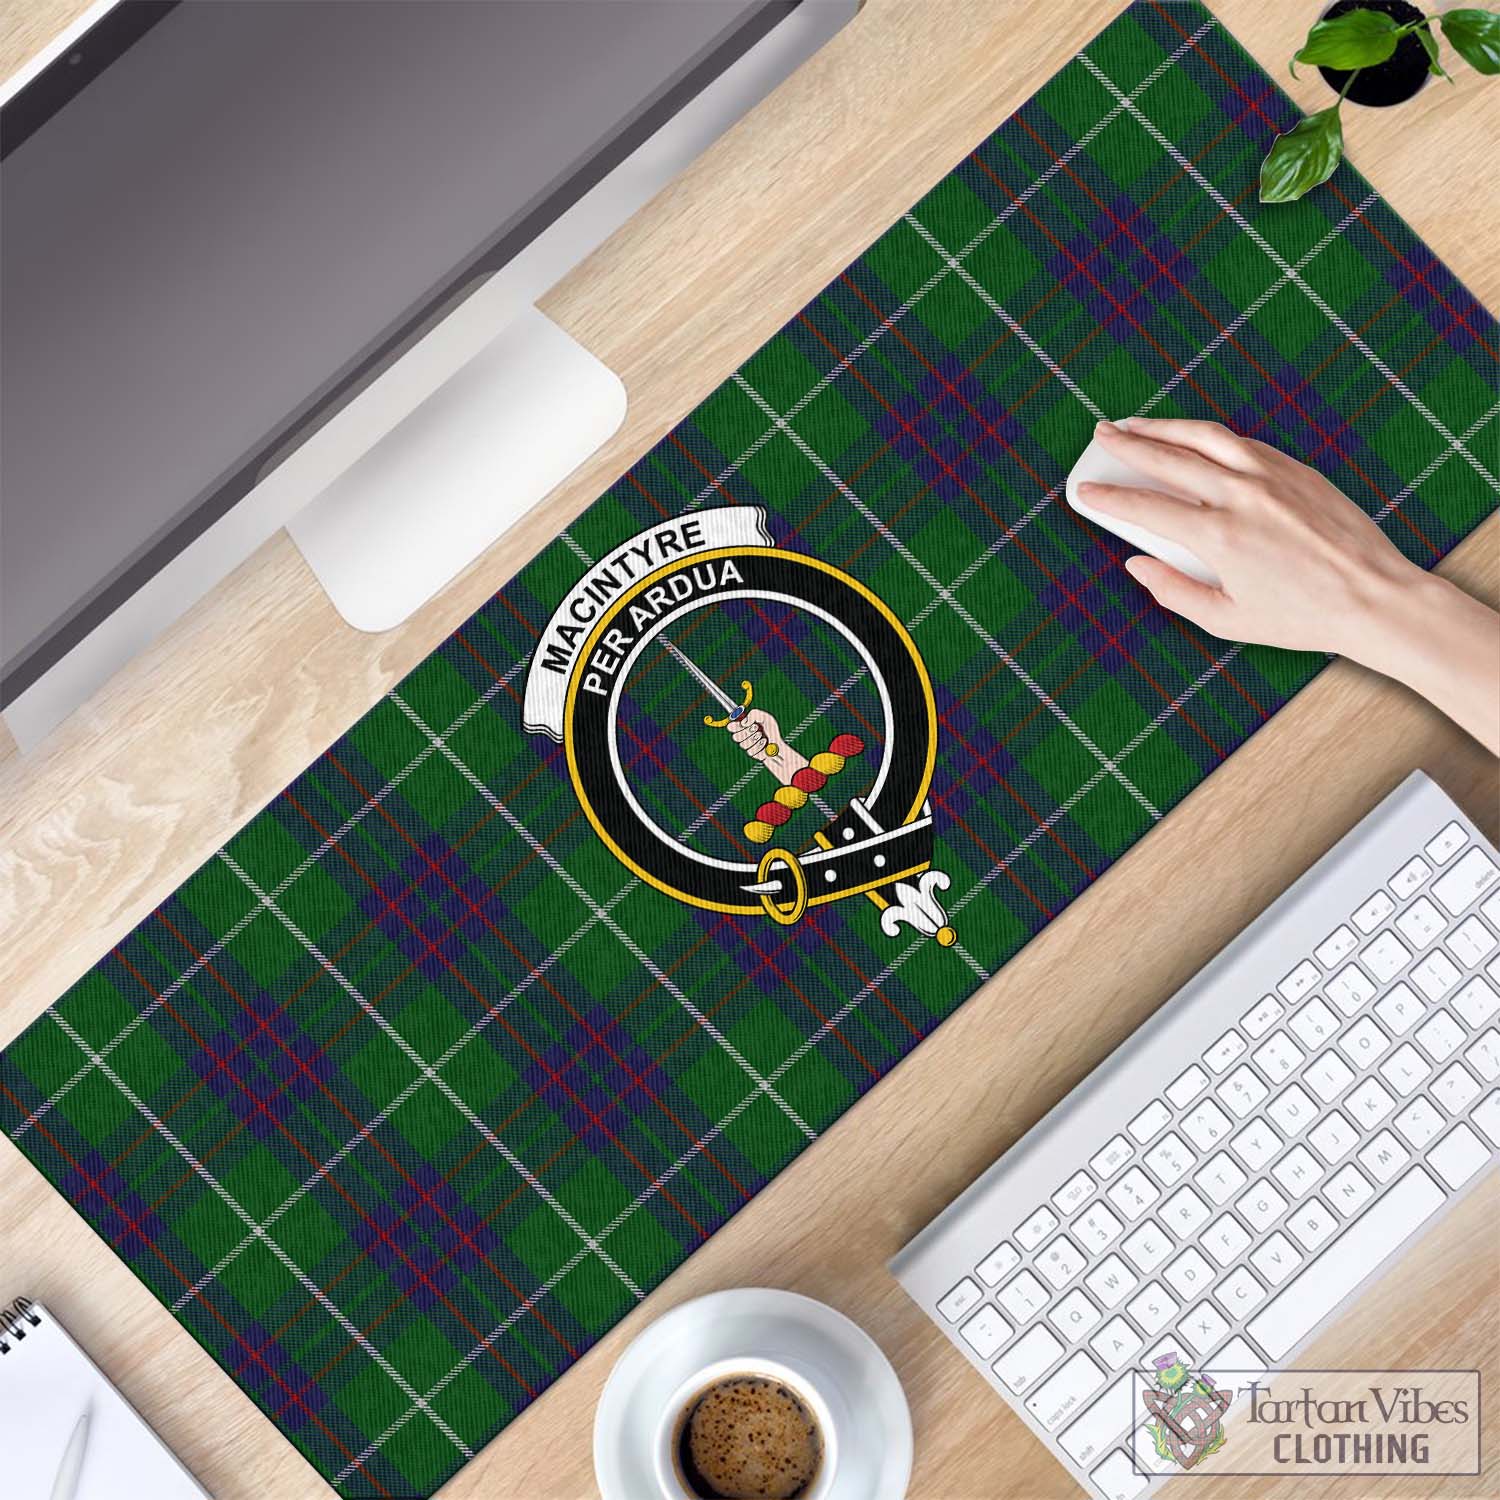 Tartan Vibes Clothing MacIntyre Hunting Tartan Mouse Pad with Family Crest